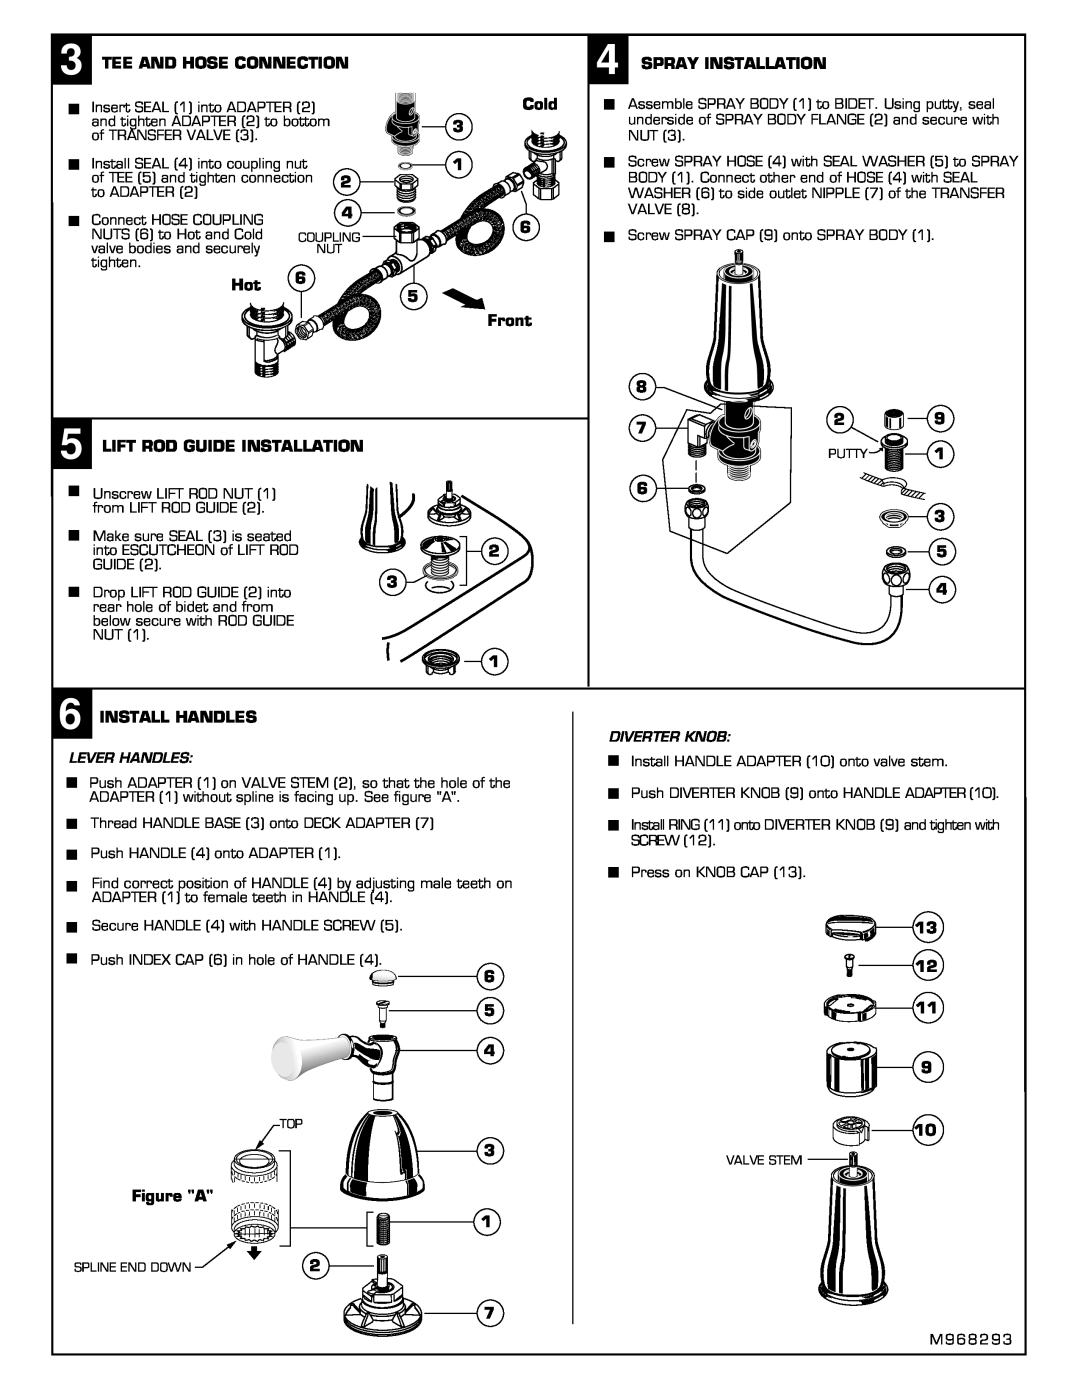 American Standard 2580 installation instructions Tee And Hose Connection 